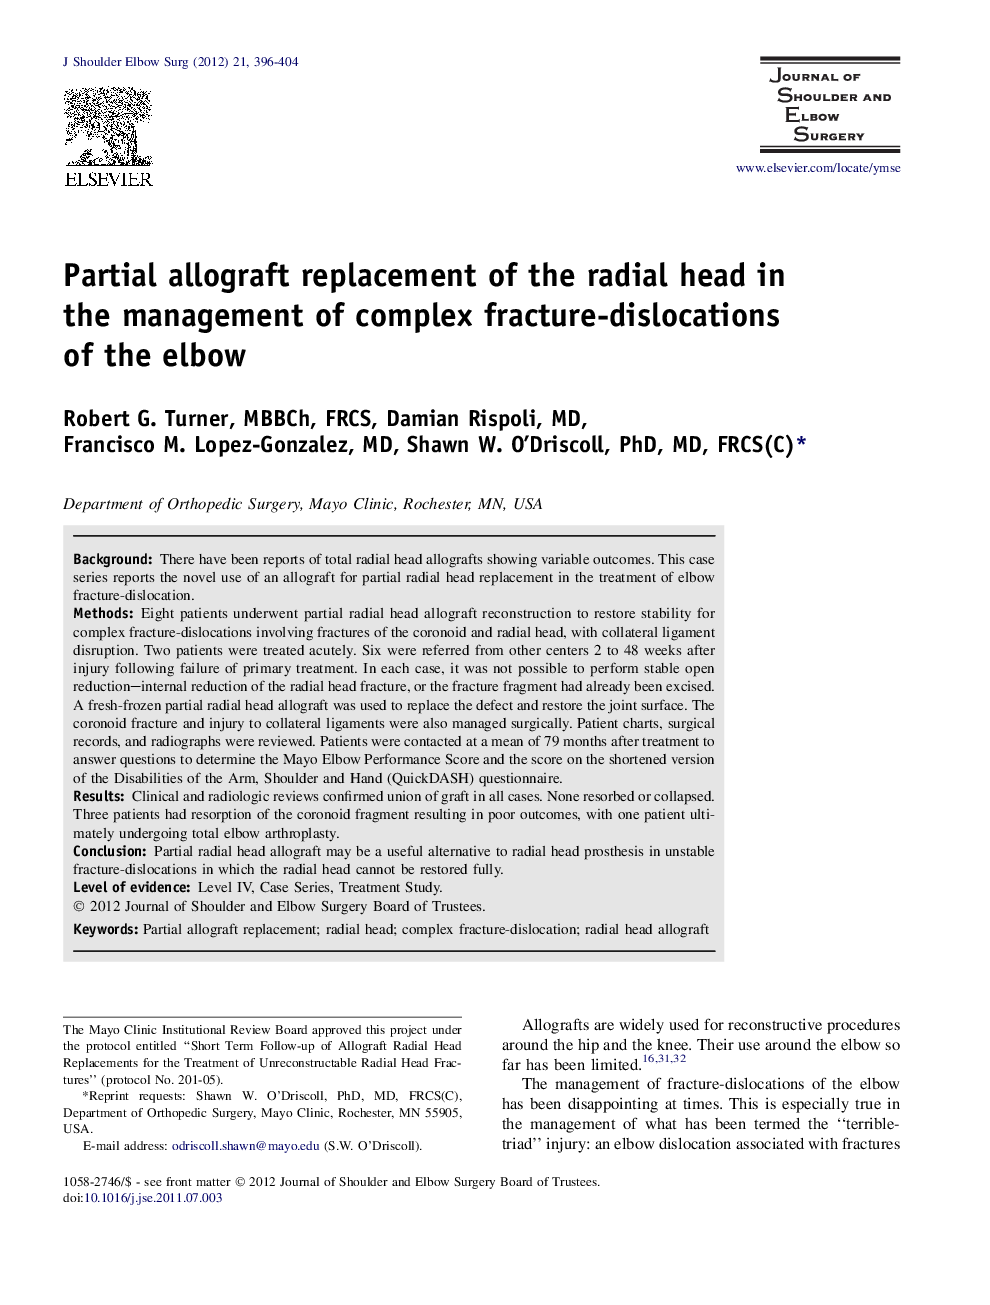 Partial allograft replacement of the radial head in the management of complex fracture-dislocations of the elbow 